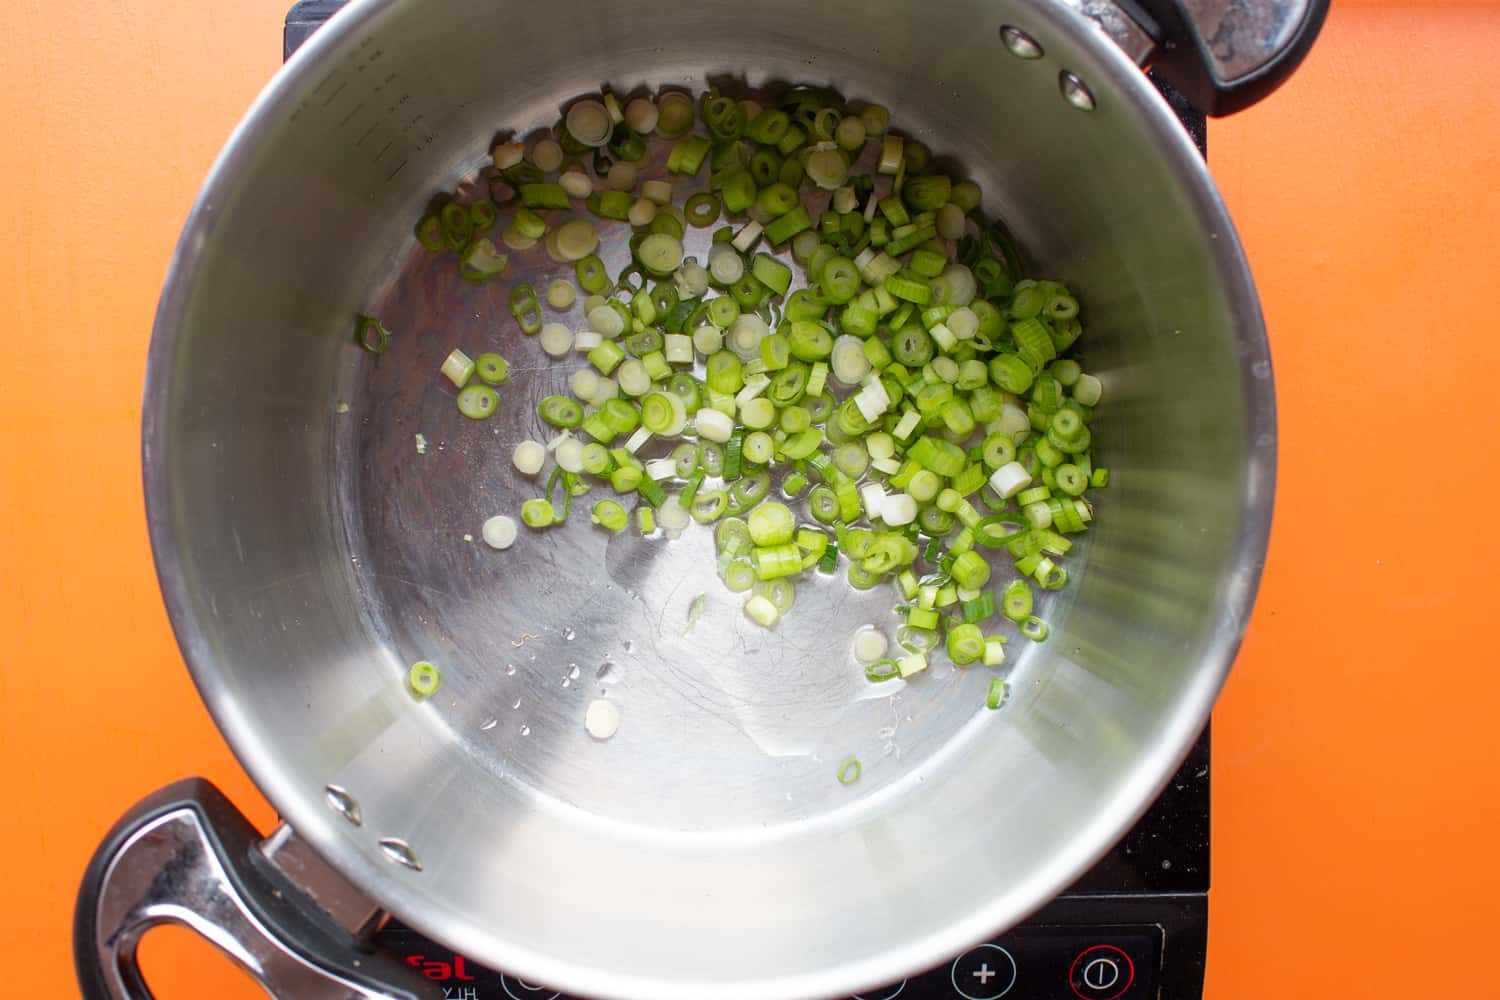 Chopped spring onion in large saucepan with 2 handles on cooker on an orange background.